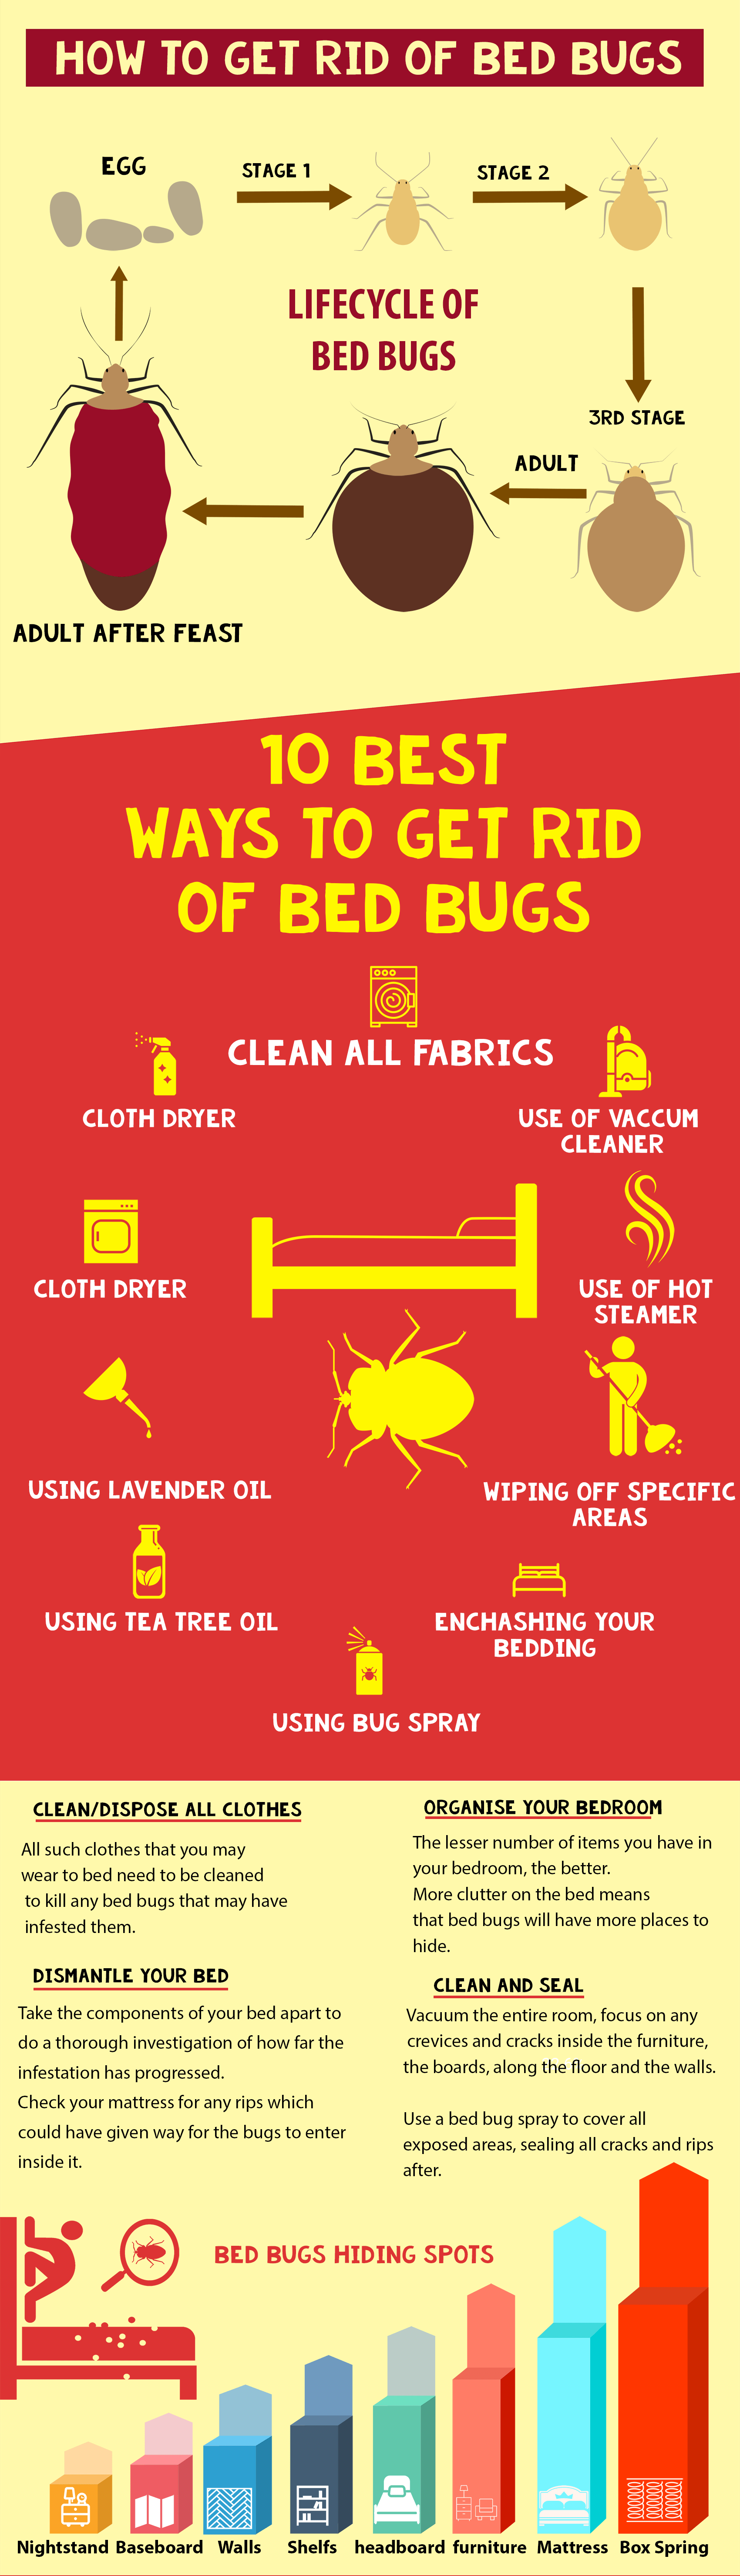 How to get rid of Bed Bugs - Infographic